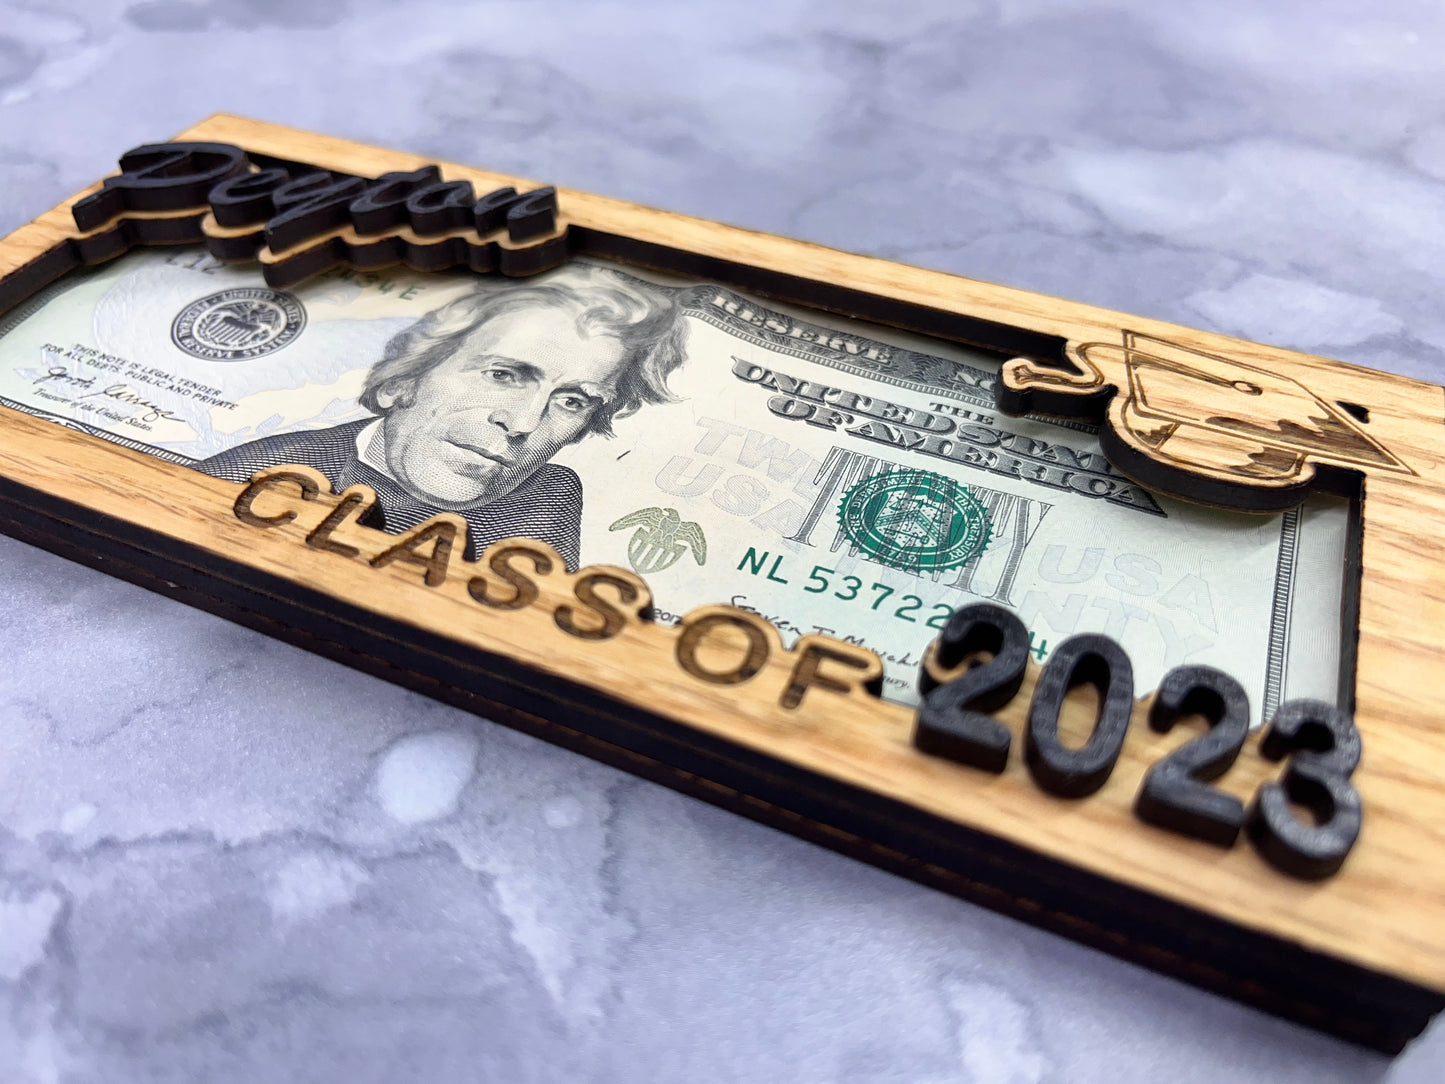 Class of 2023 Personalized Money Holder